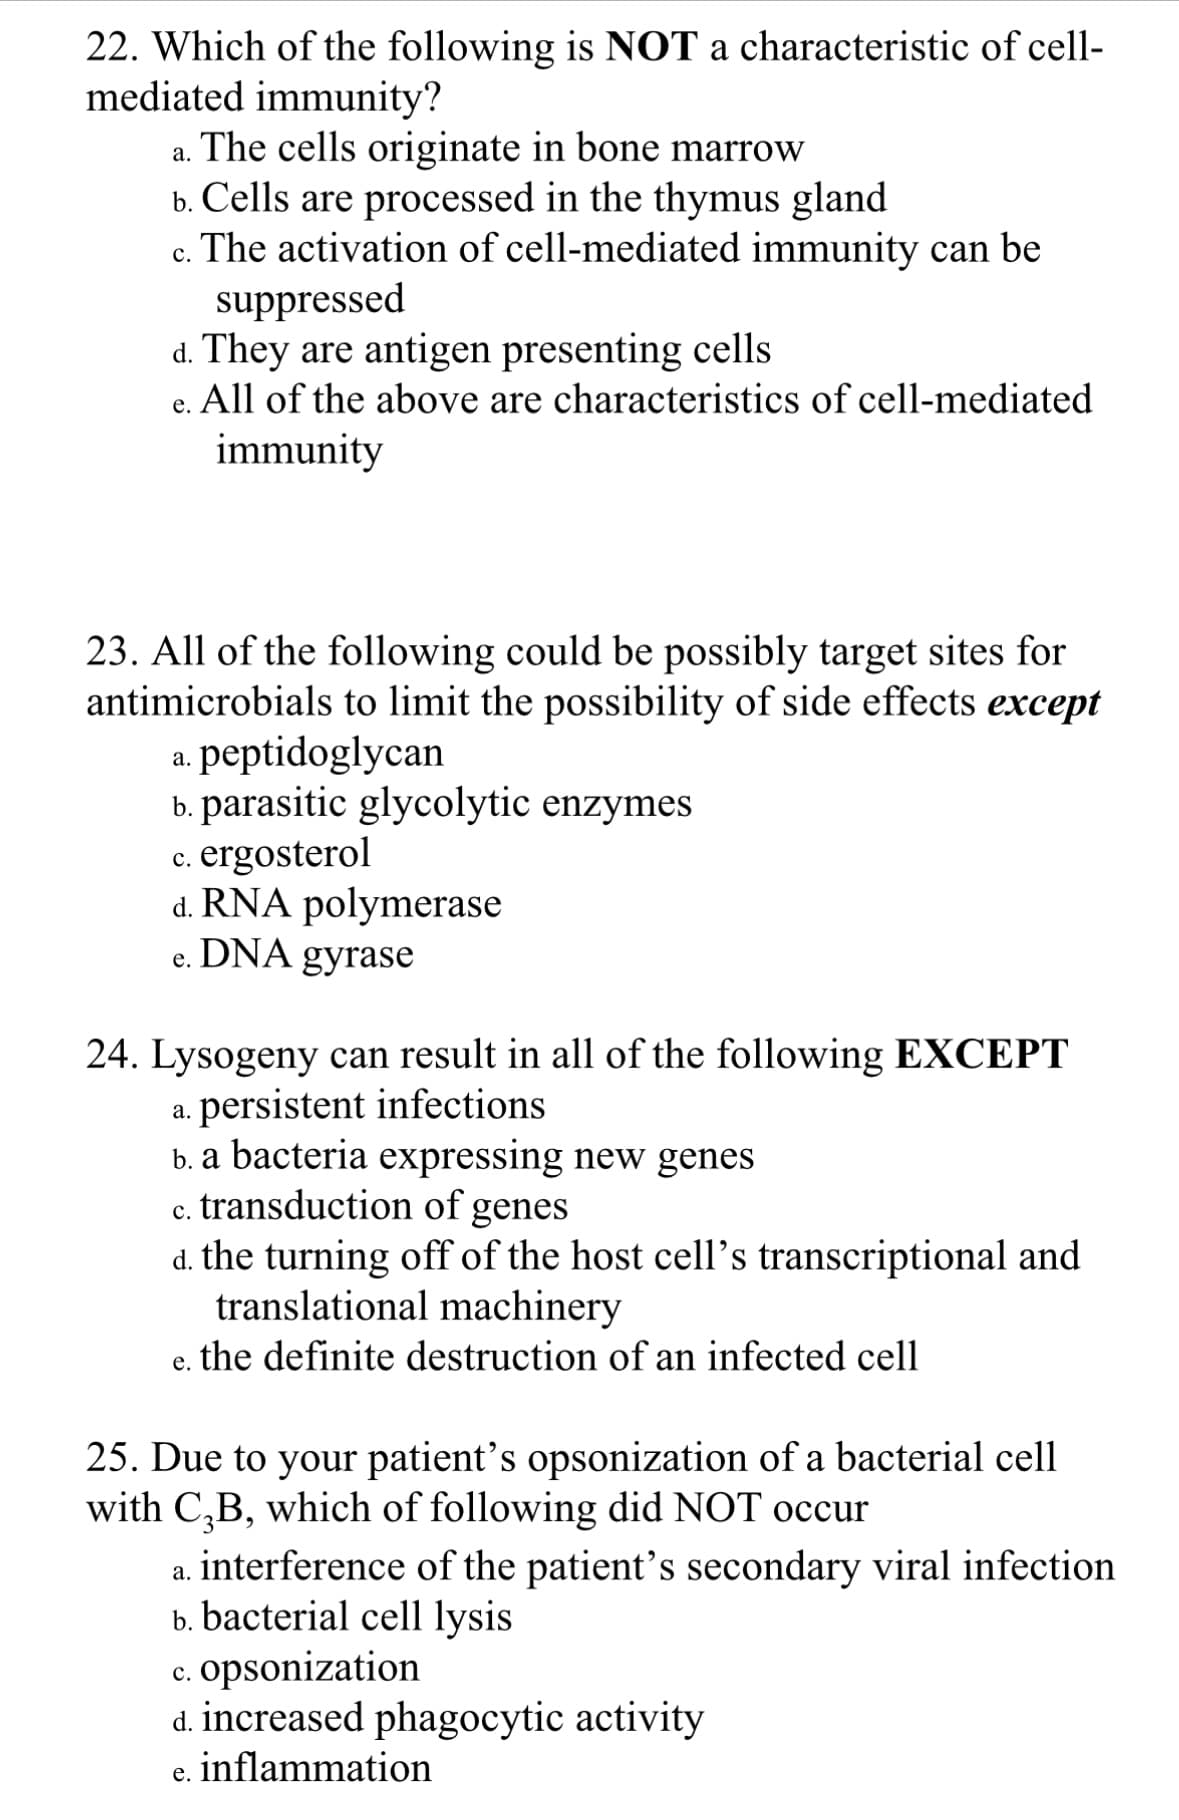 22. Which of the following is NOT a characteristic of cell-
mediated immunity?
a. The cells originate in bone marrow
b. Cells are processed in the thymus gland
c. The activation of cell-mediated immunity can be
suppressed
d. They are antigen presenting cells
e. All of the above are characteristics of cell-mediated
immunity
23. All of the following could be possibly target sites for
antimicrobials to limit the possibility of side effects except
a. peptidoglycan
b. parasitic glycolytic enzymes
c. ergosterol
C.
d. RNA polymerase
DNA
gyrase
e.
24. Lysogeny can result in all of the following EXCEPT
a. persistent infections
b. a bacteria expressing new genes
c. transduction of genes
C.
d. the turning off of the host cell's transcriptional and
translational machinery
e. the definite destruction of an infected cell
25. Due to your patient's opsonization of a bacterial cell
with C₂B, which of following did NOT occur
a. interference of the patient's secondary viral infection
b. bacterial cell lysis
c. opsonization
d. increased phagocytic activity
e. inflammation